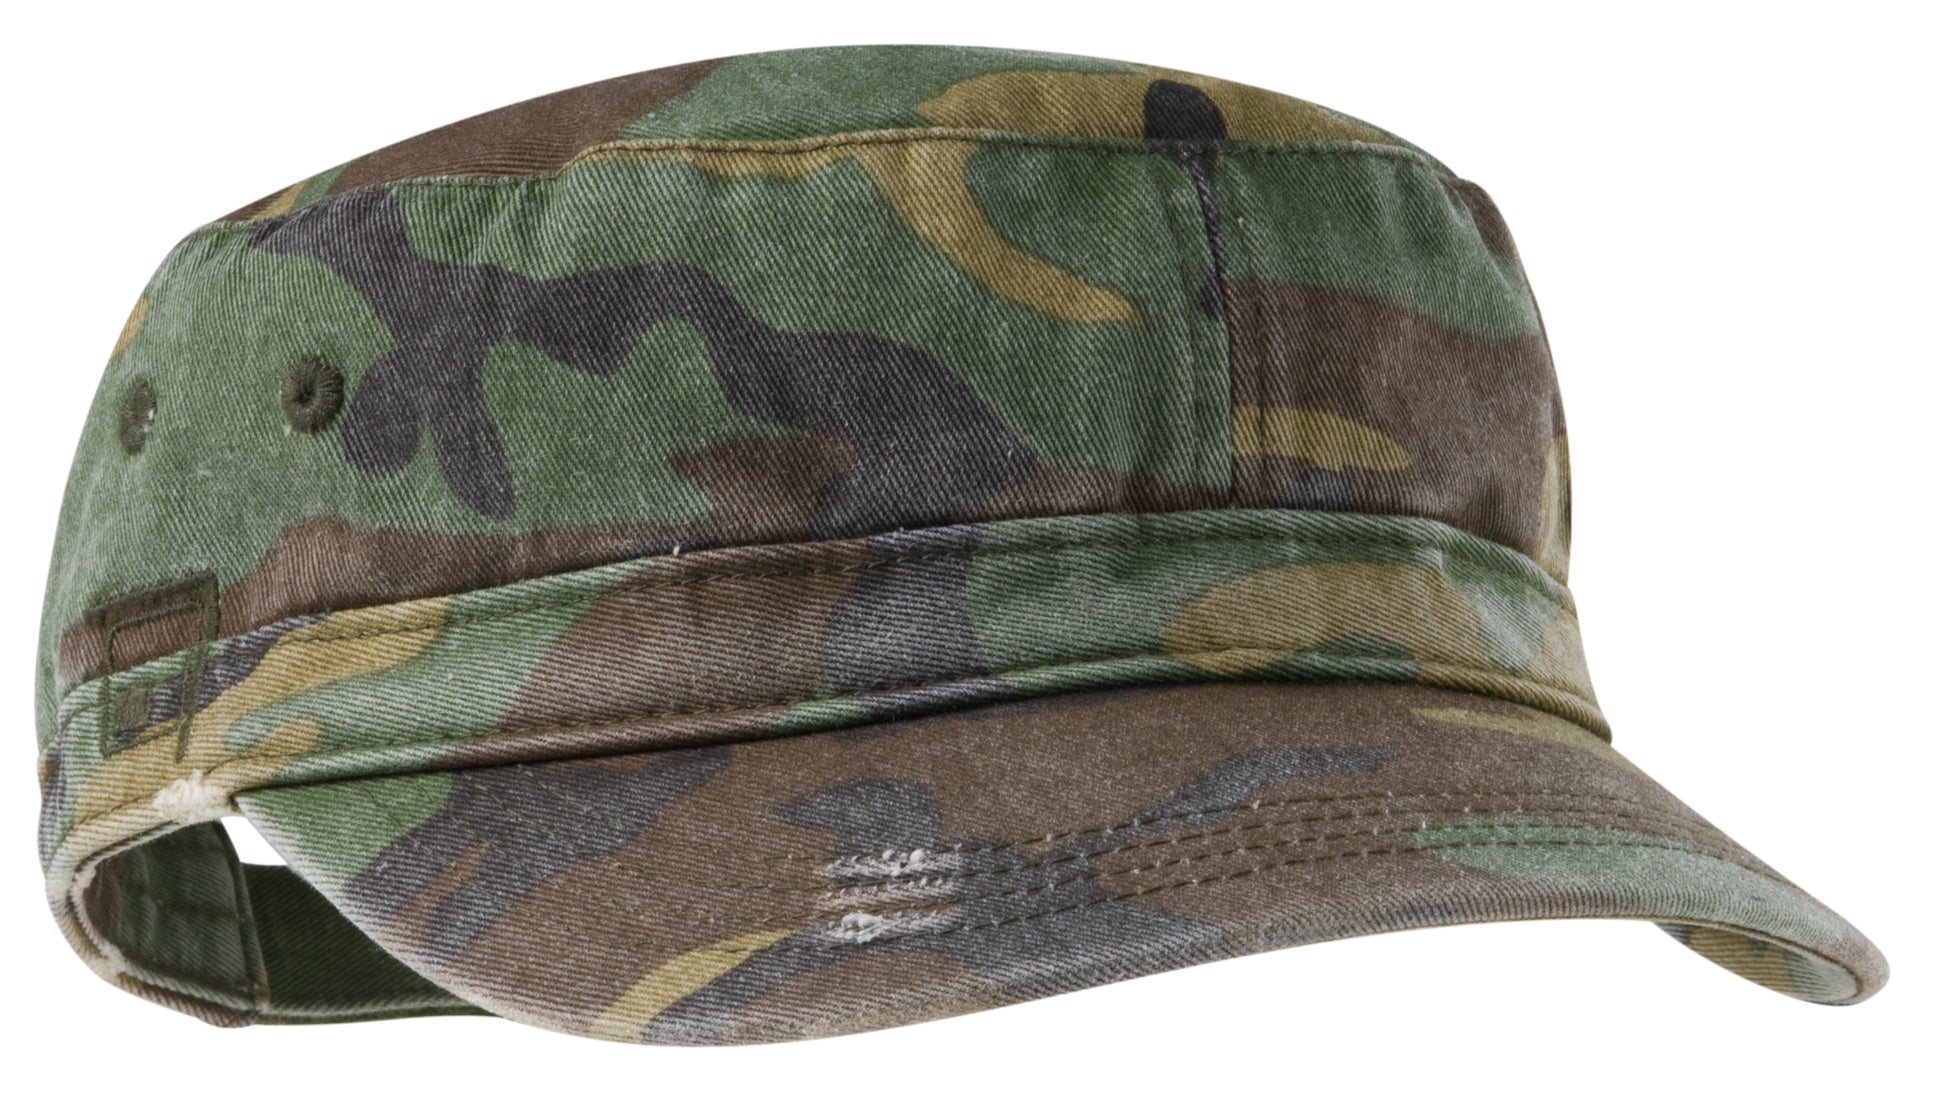 district distressed military hat camo